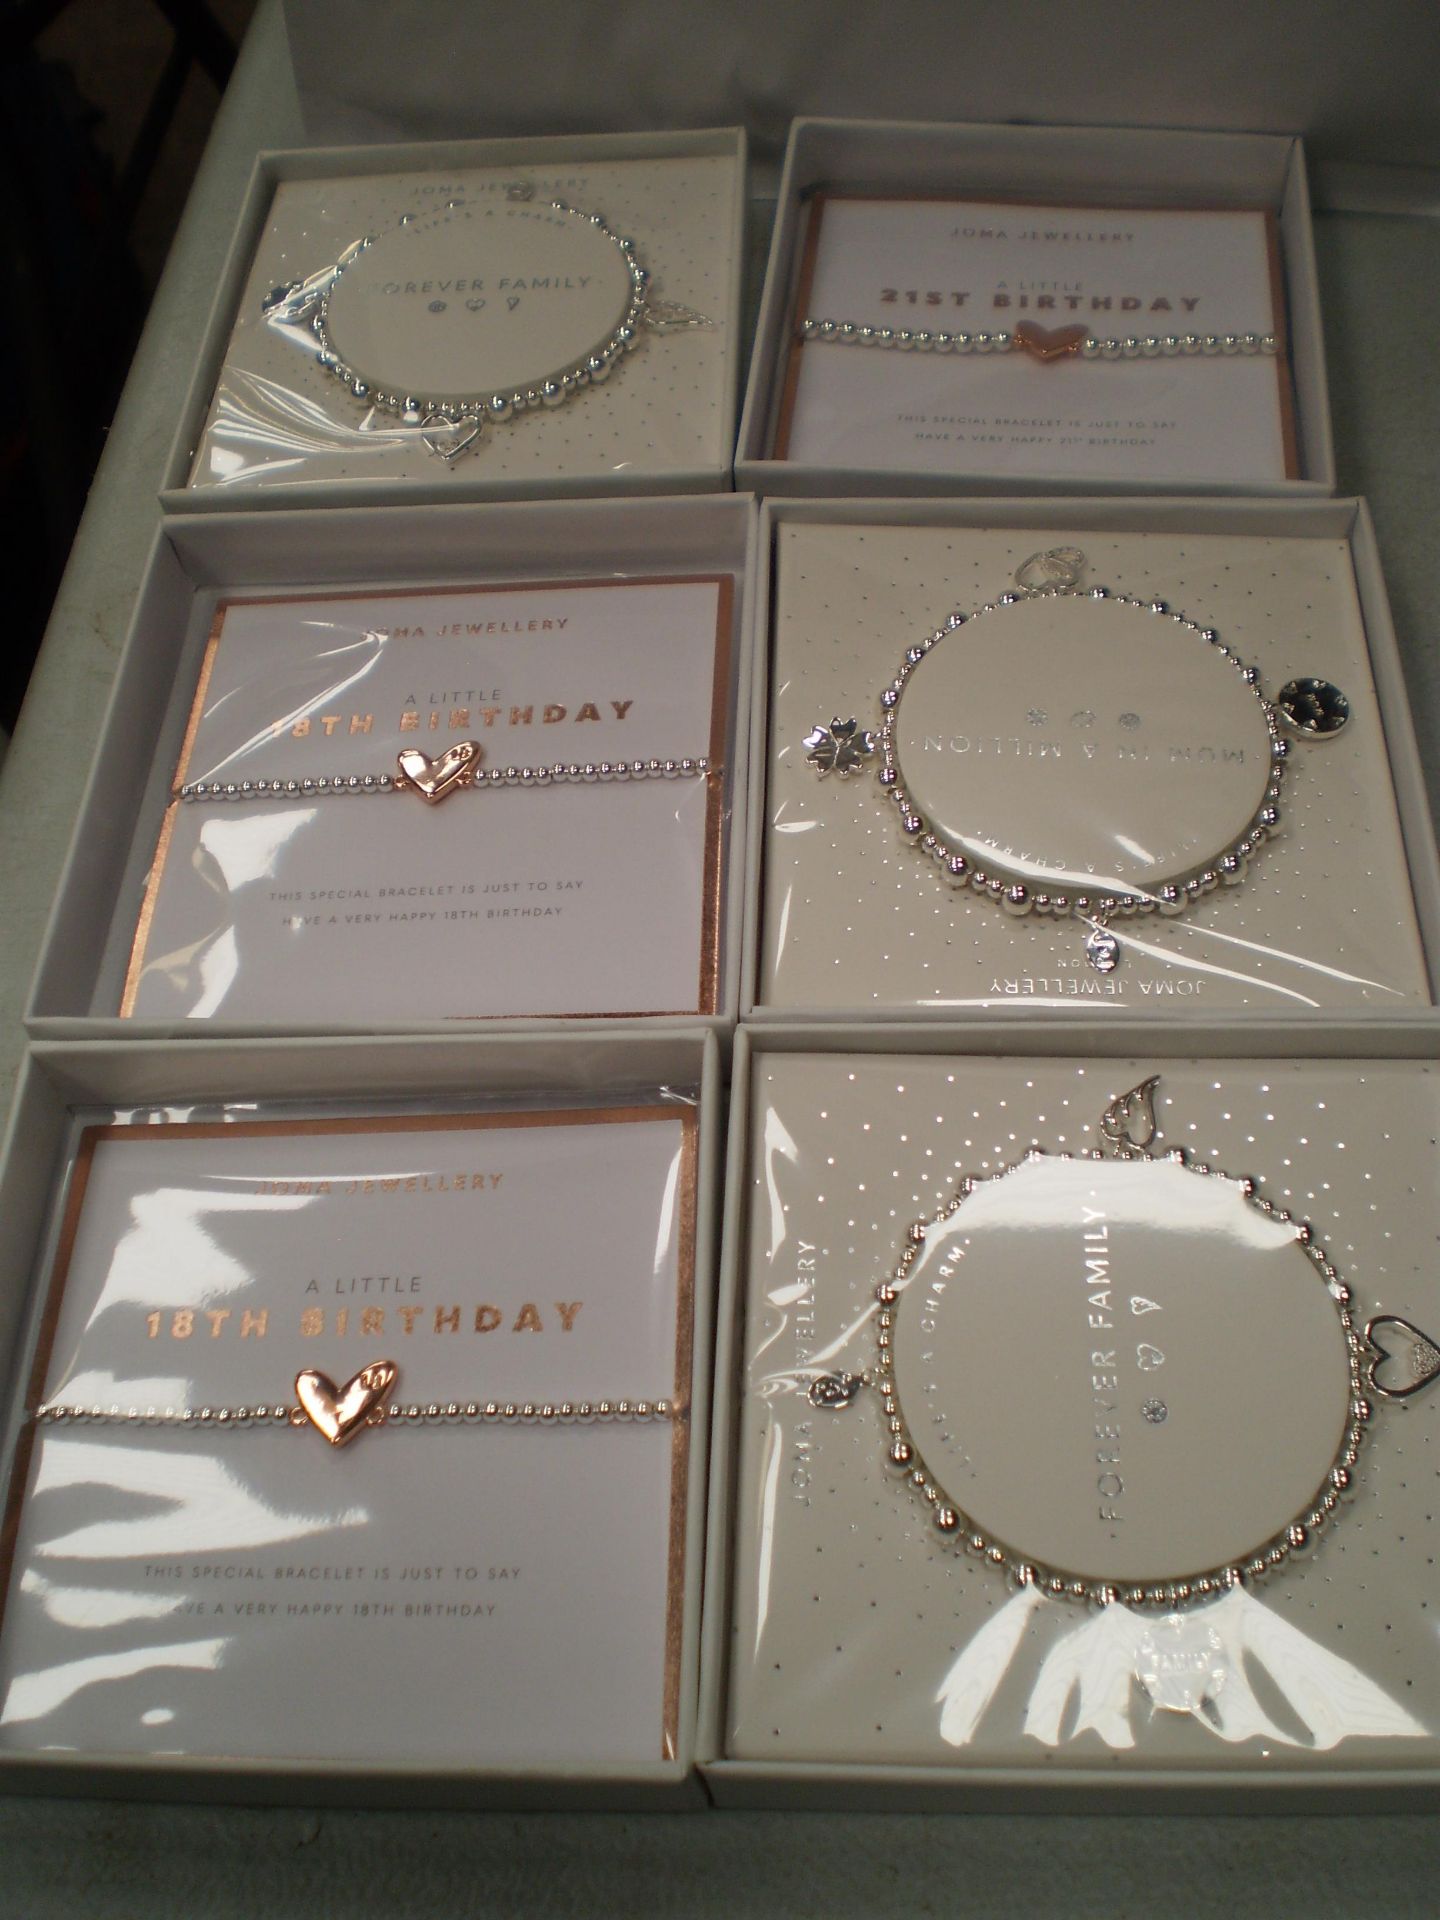 6 x Joma jewellery bracelets and 9 x pairs of Joma earrings - new in box (C13A)